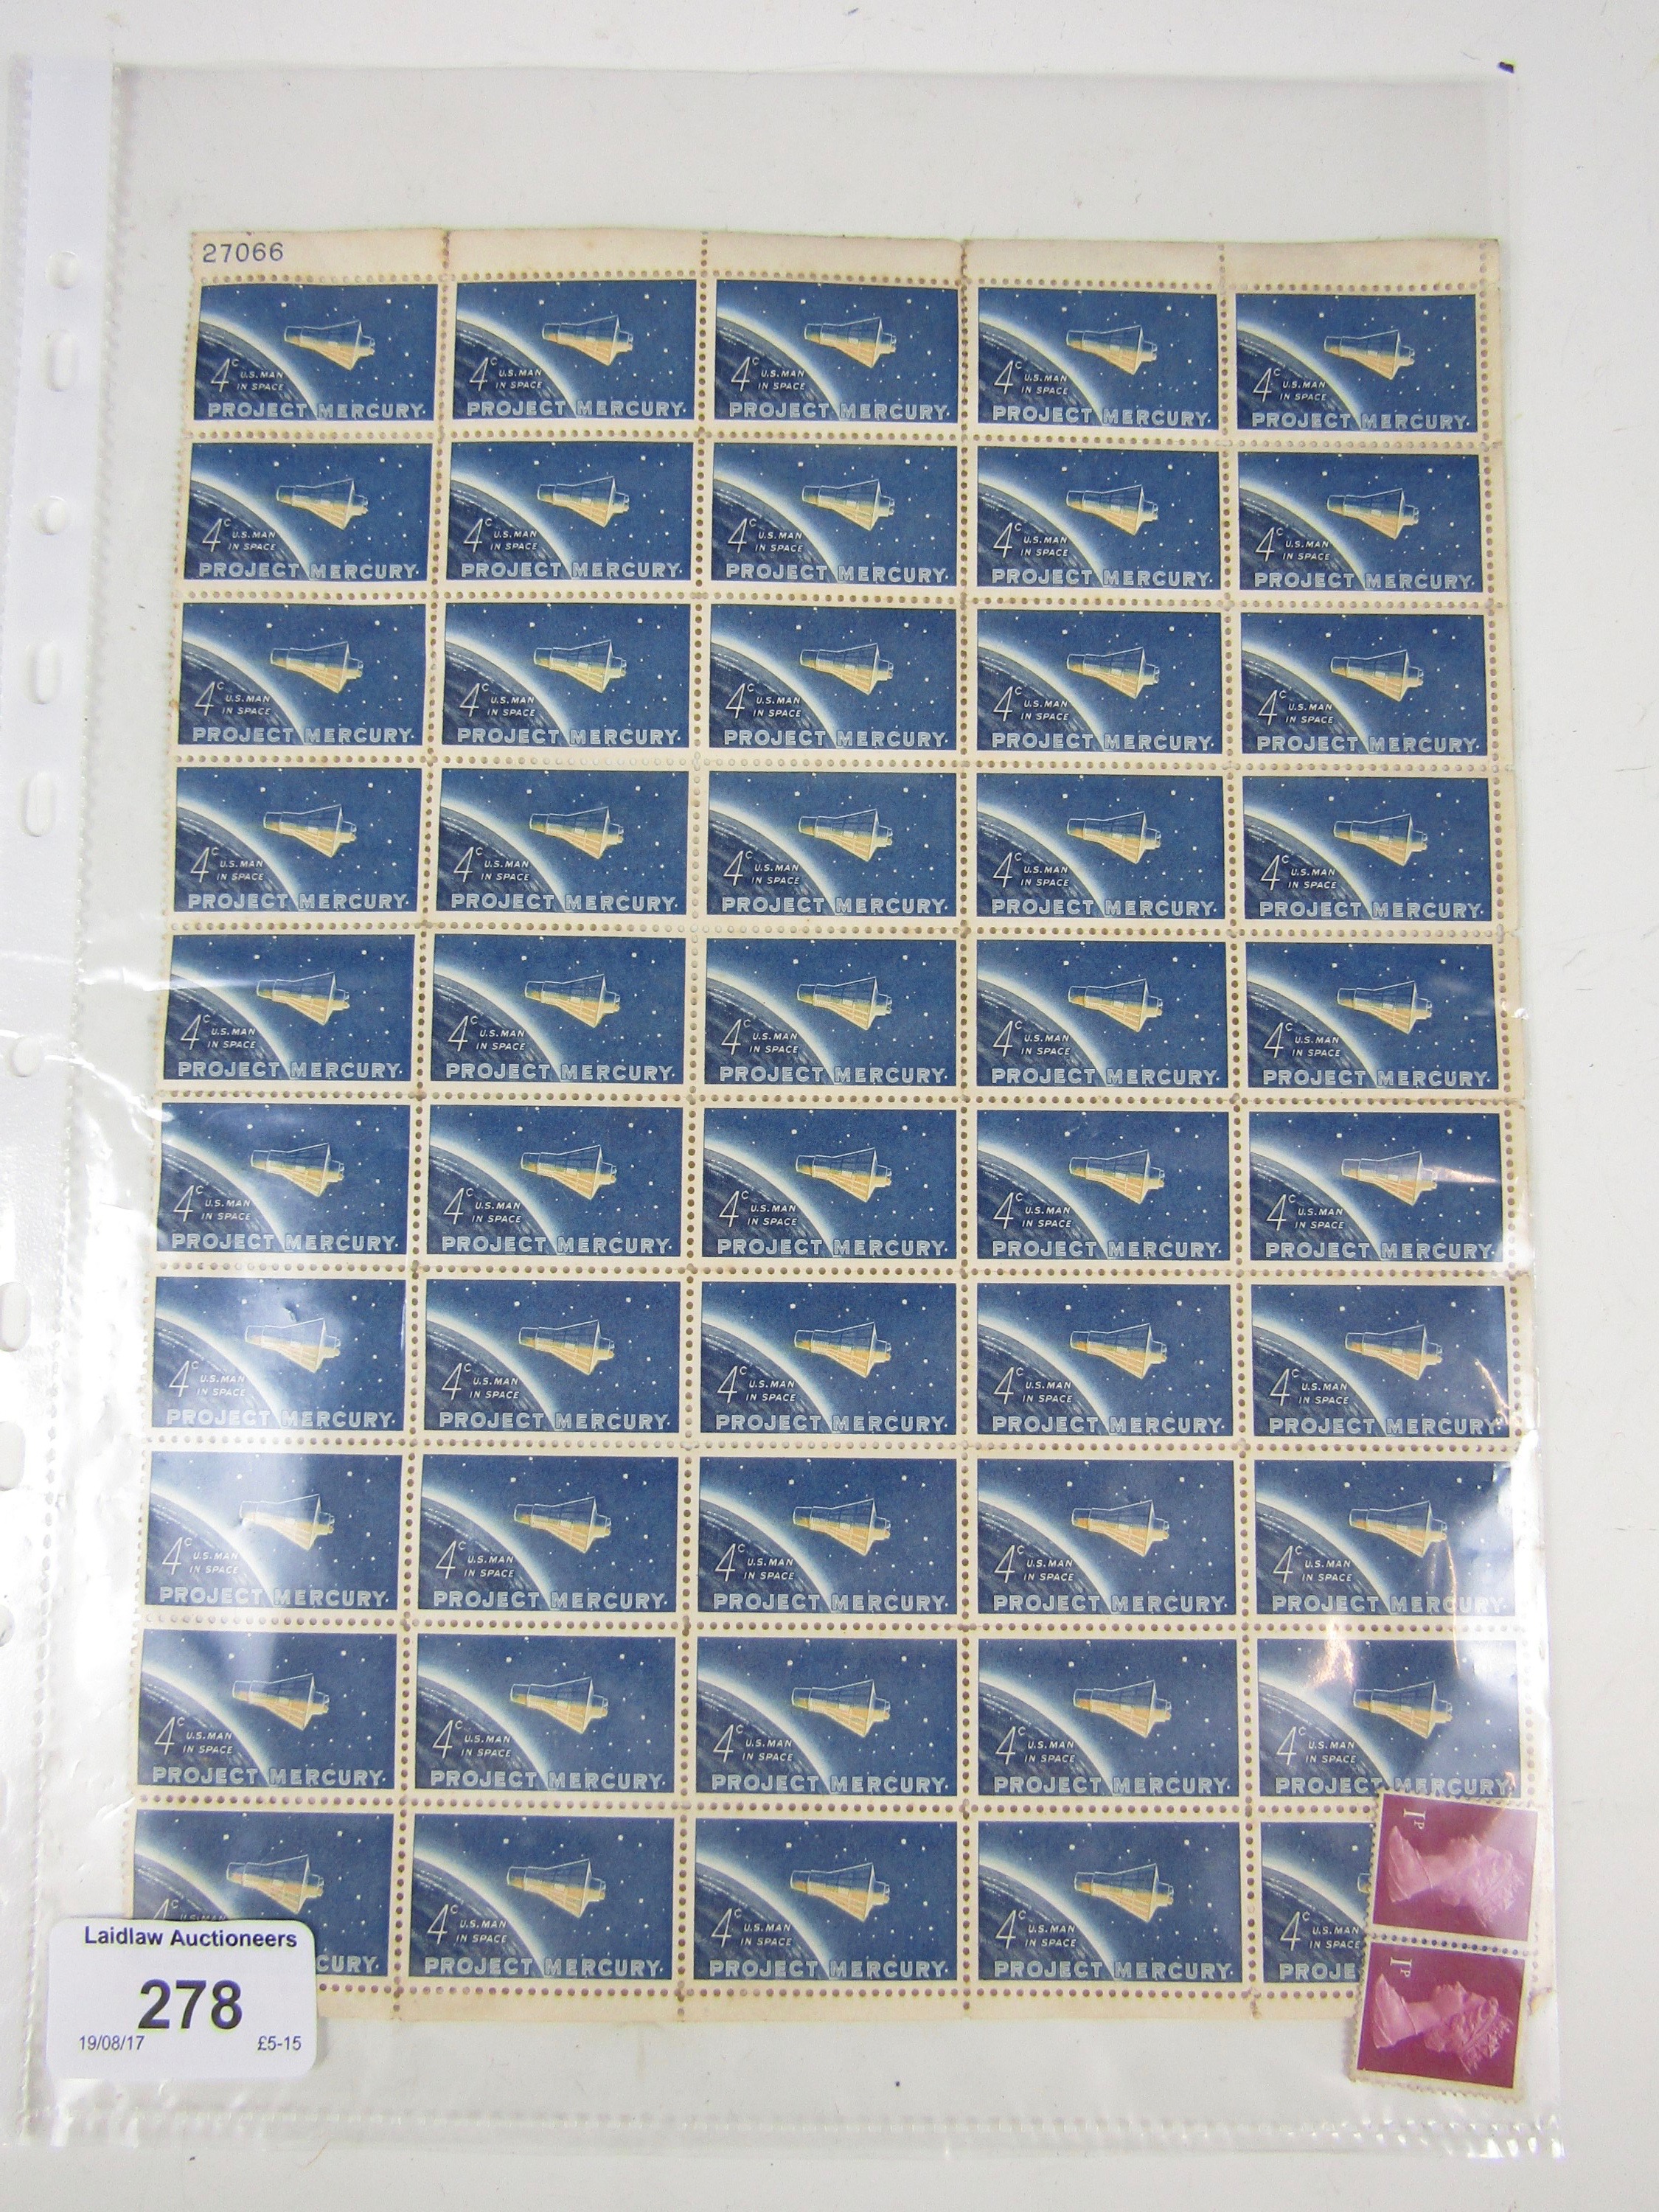 A sheet of four cents Project Mercury stamps